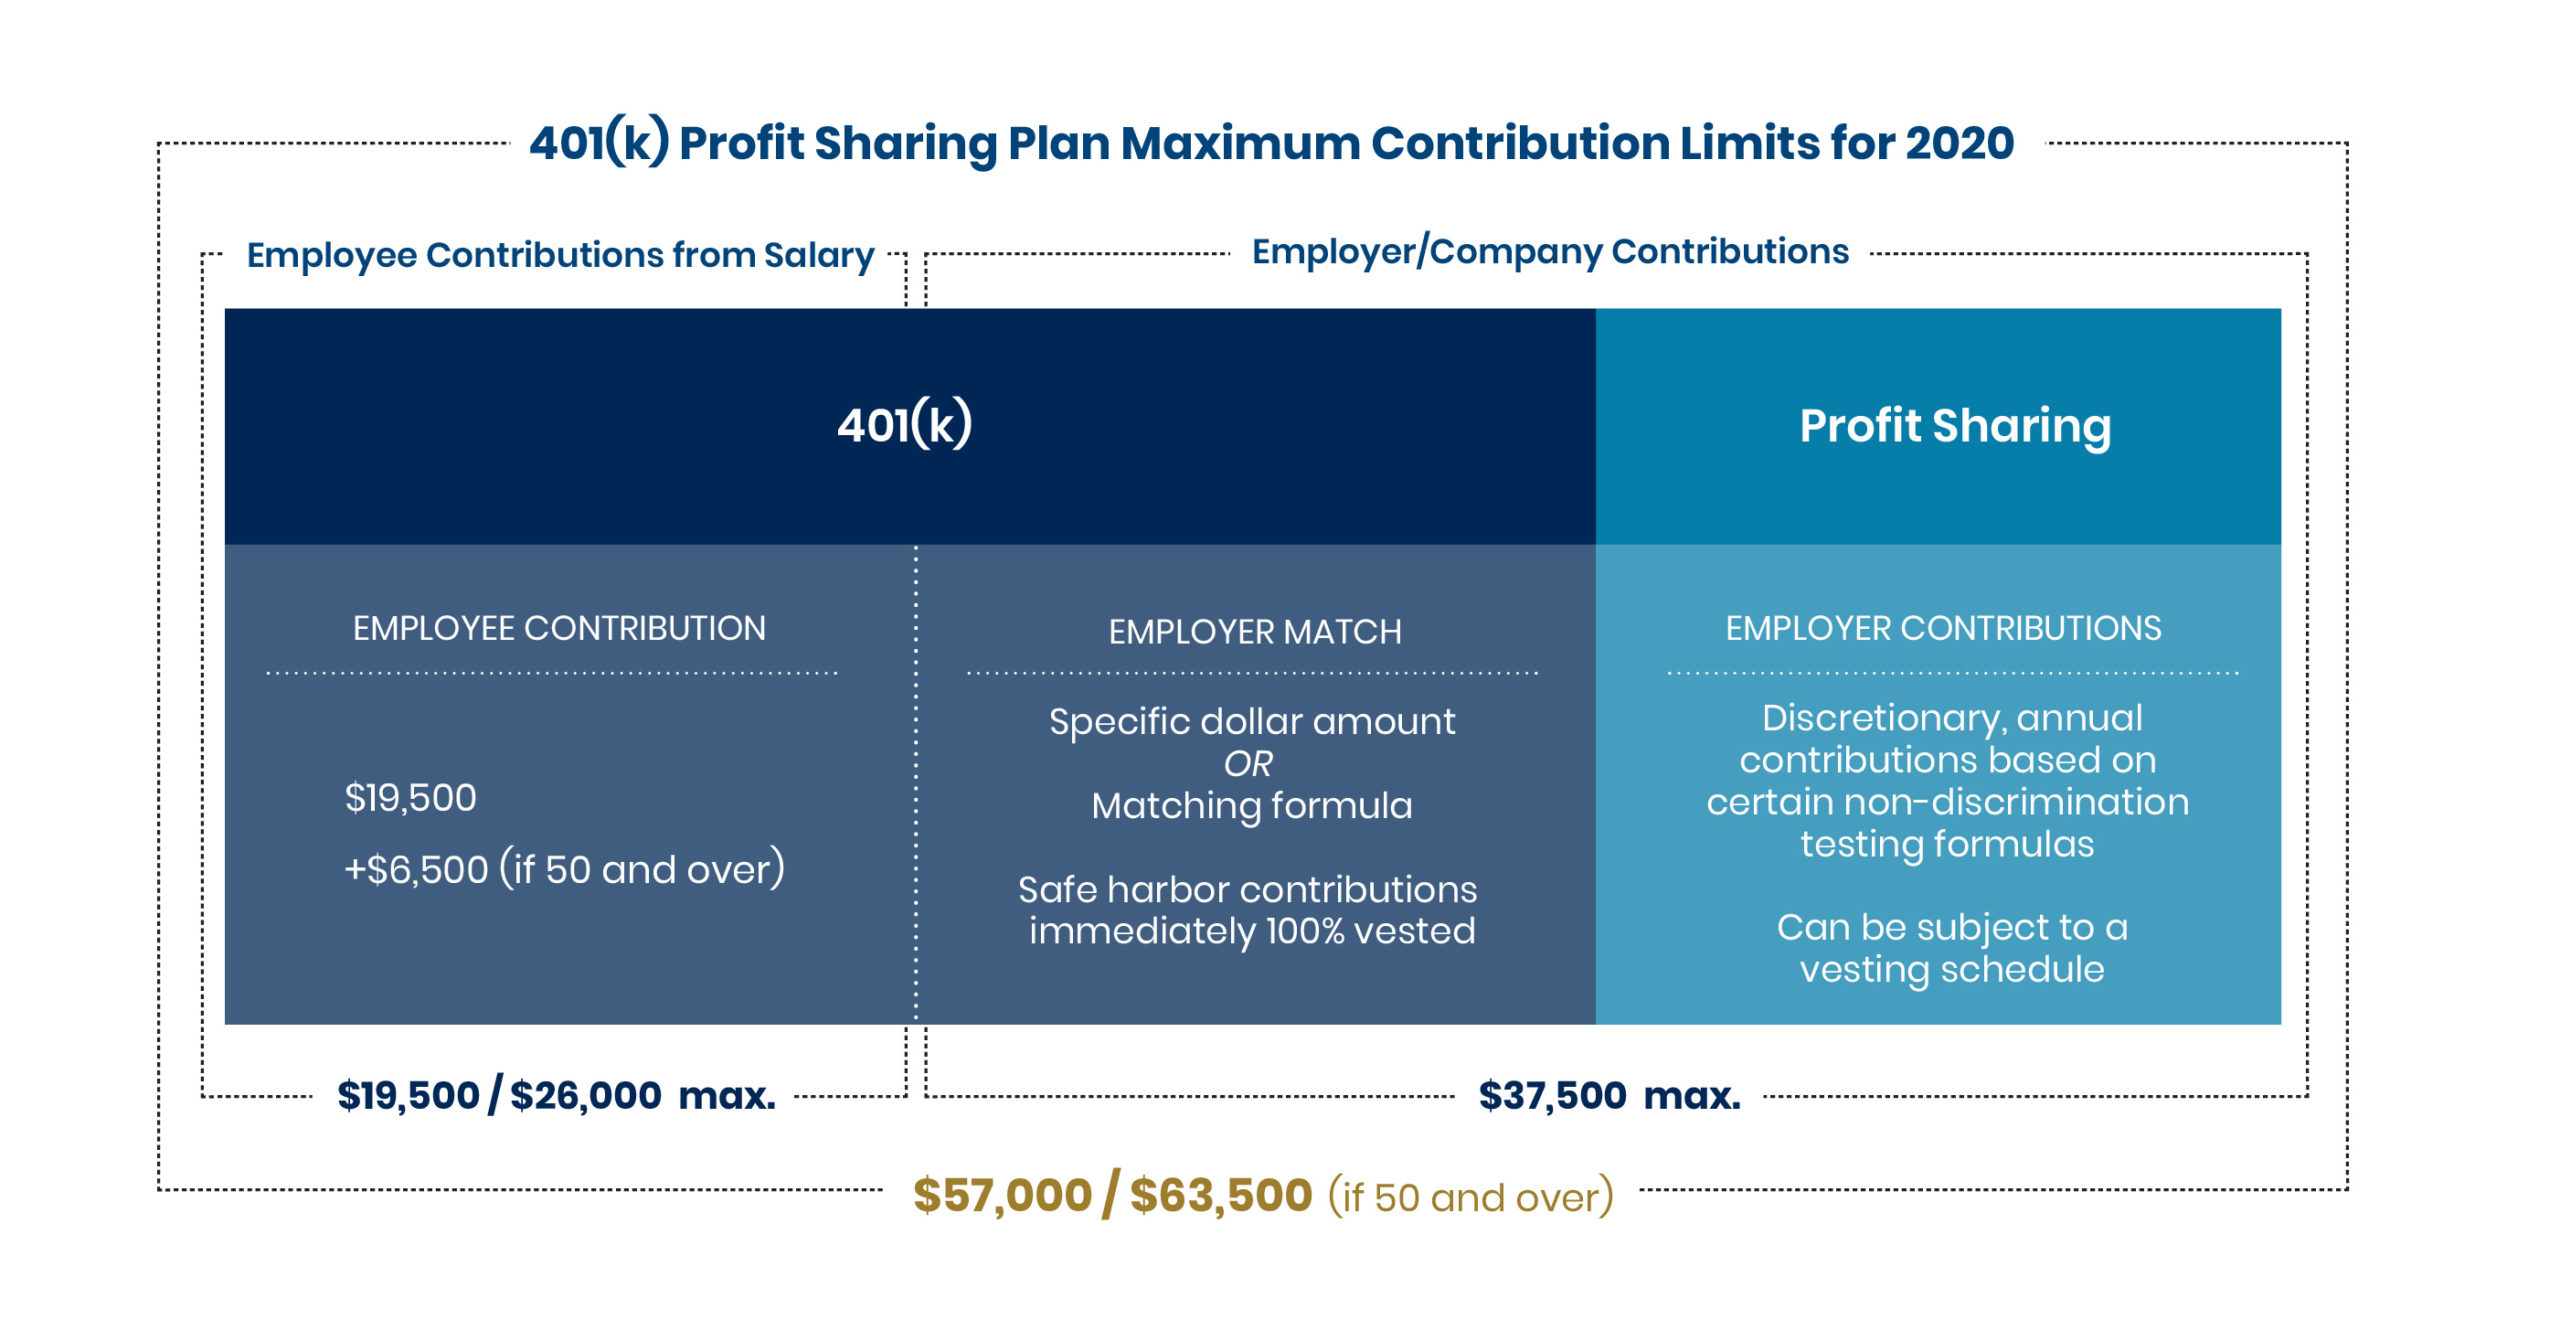 illustration of 401(k) and Profit Sharing Plan Max. Contribution Limits for 2020